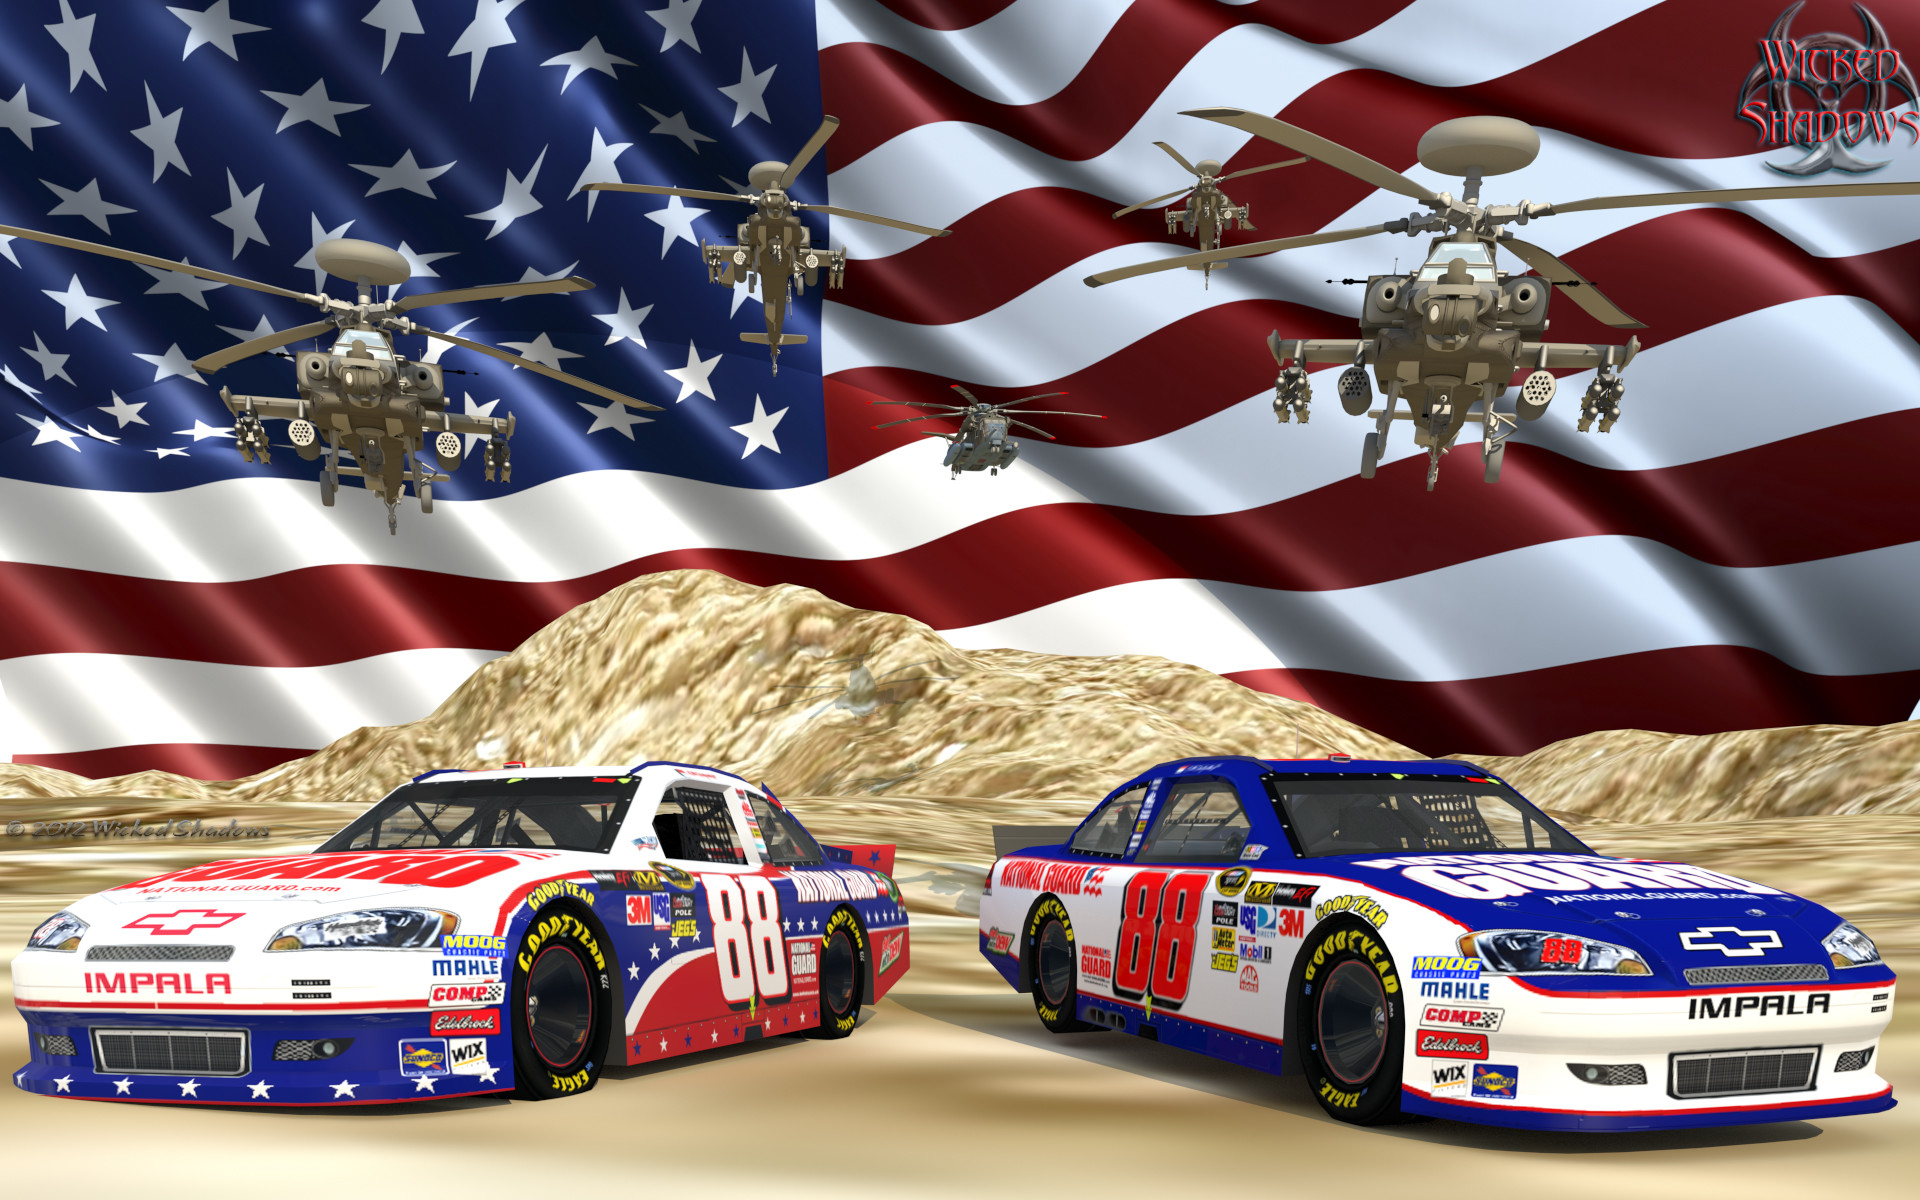 1920x1200 Wallpapers By Wicked Shadows Dale Earnhardt Jr Nascar Unites 